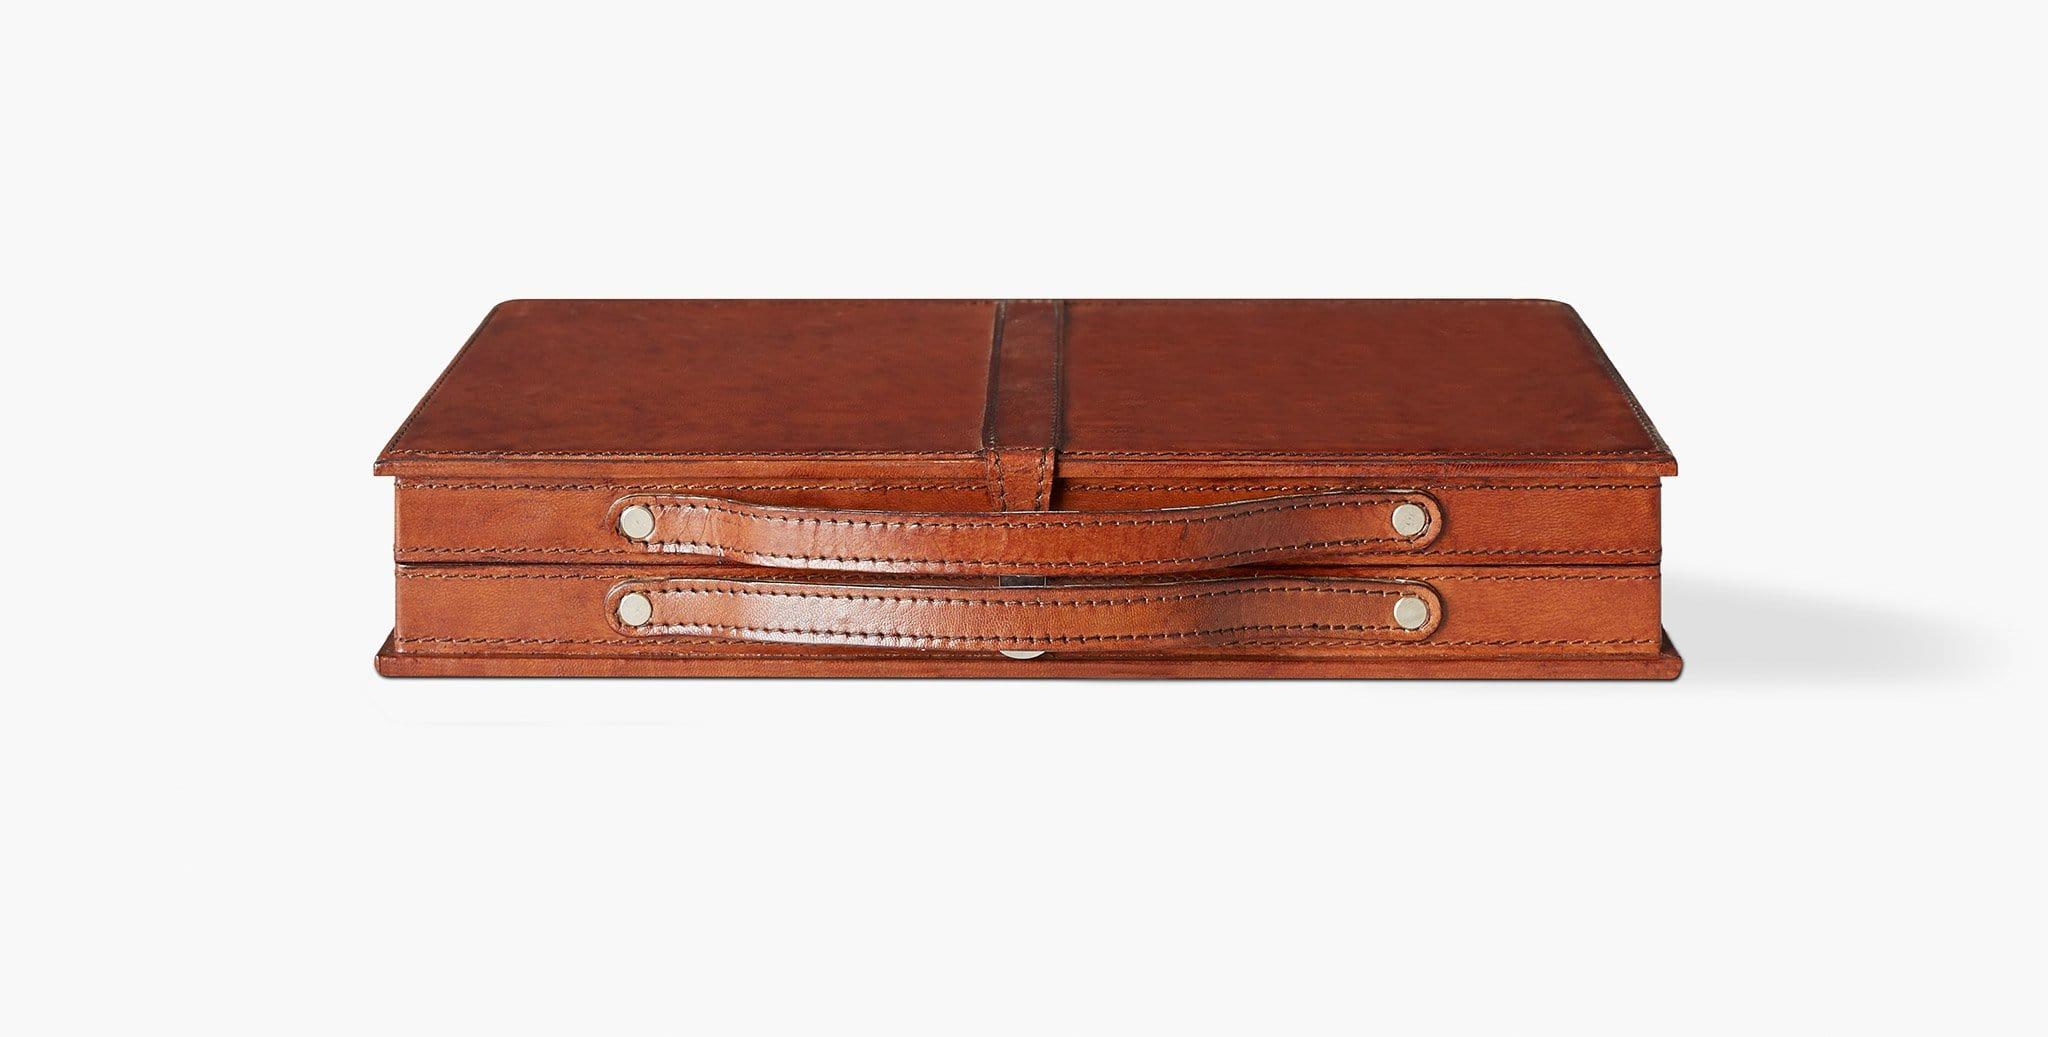 Our Moore Backgammon Set is crafted in genuine leather and lined in smooth velvet, featuring leather inserts and weighted playing pieces. Our handcrafted fabrics, leathers, and finishes are inspired by the natural variations within fibers, textures,